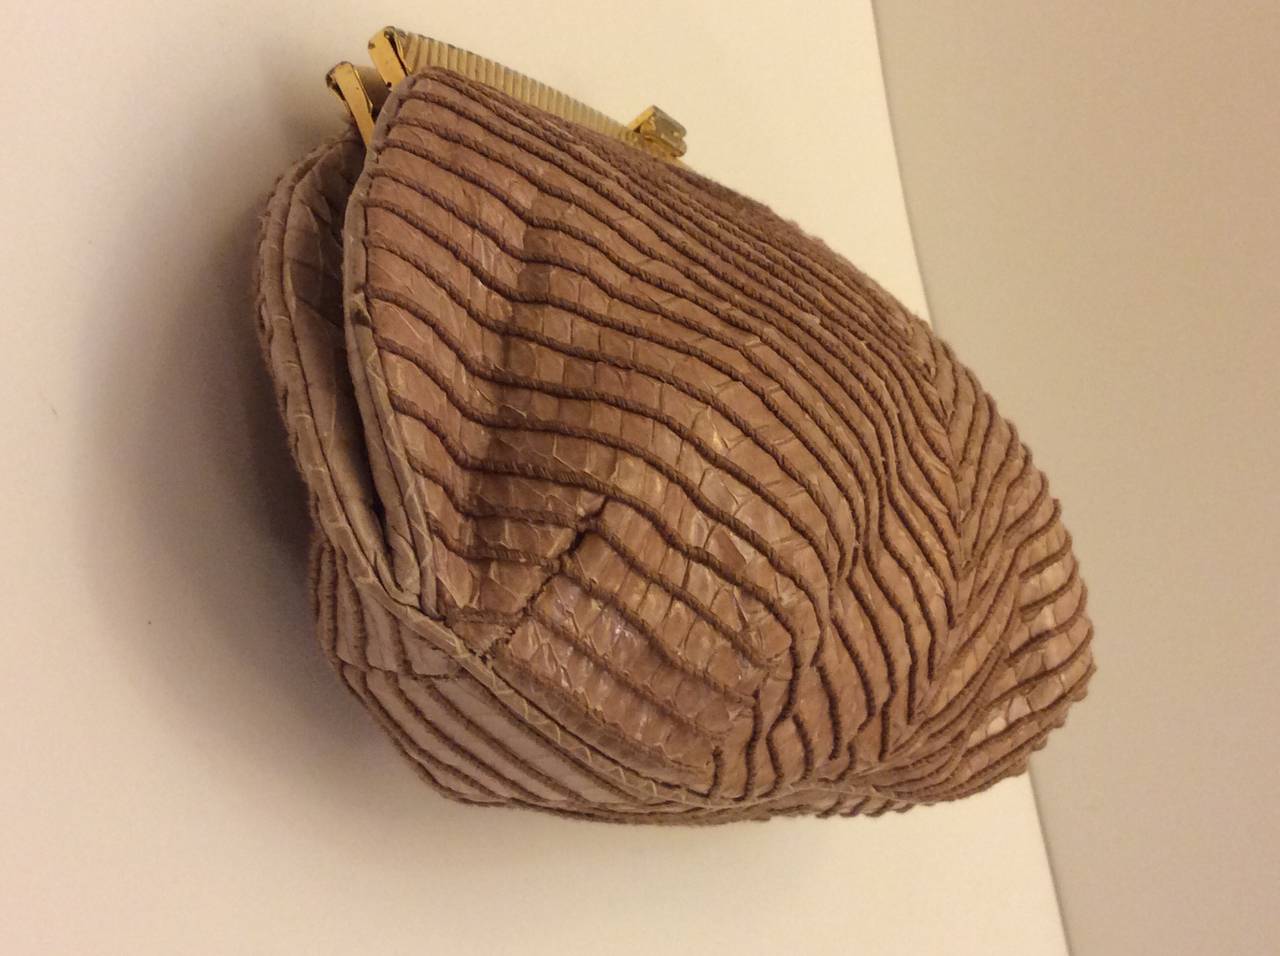 Vintage Judith Leiber Nude Snakeskin Clutch In Good Condition For Sale In Lake Park, FL